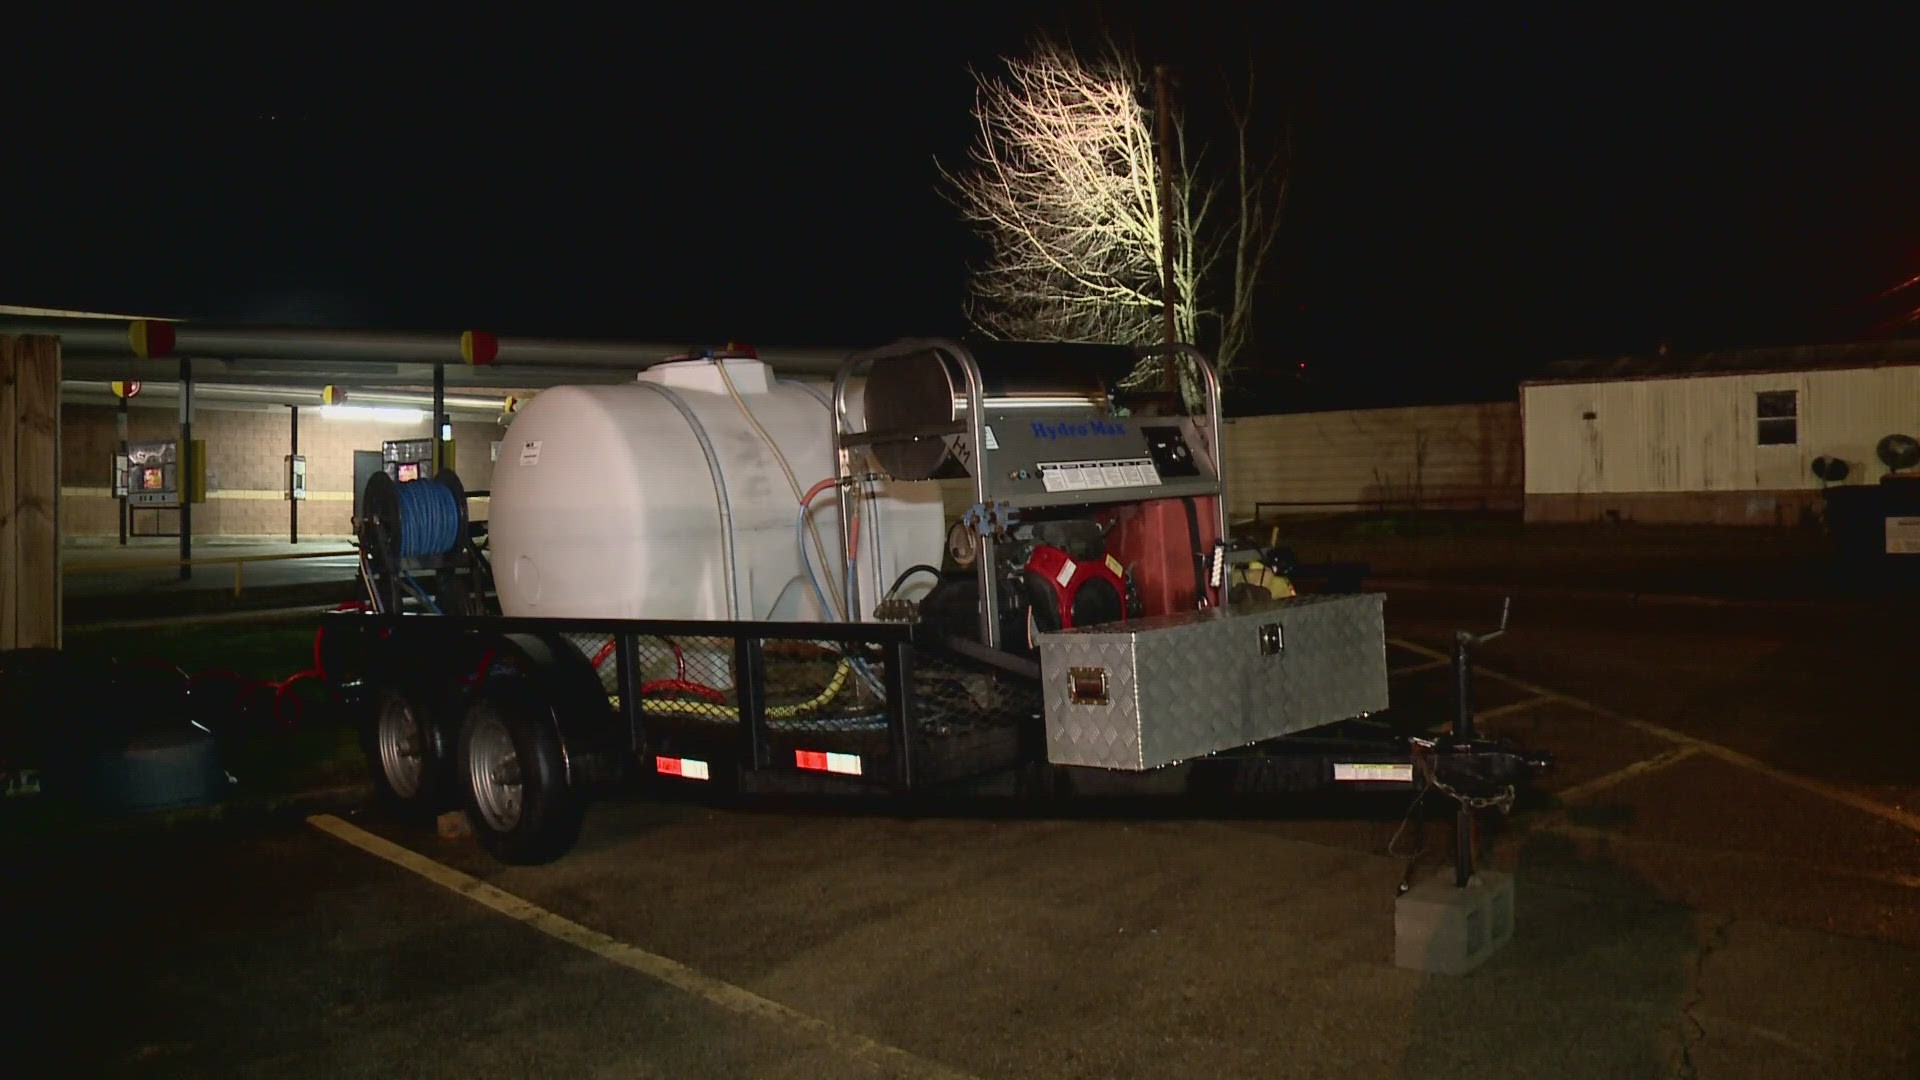 Kentwood officials said they hope to have the water running again by Monday, Jan. 22.